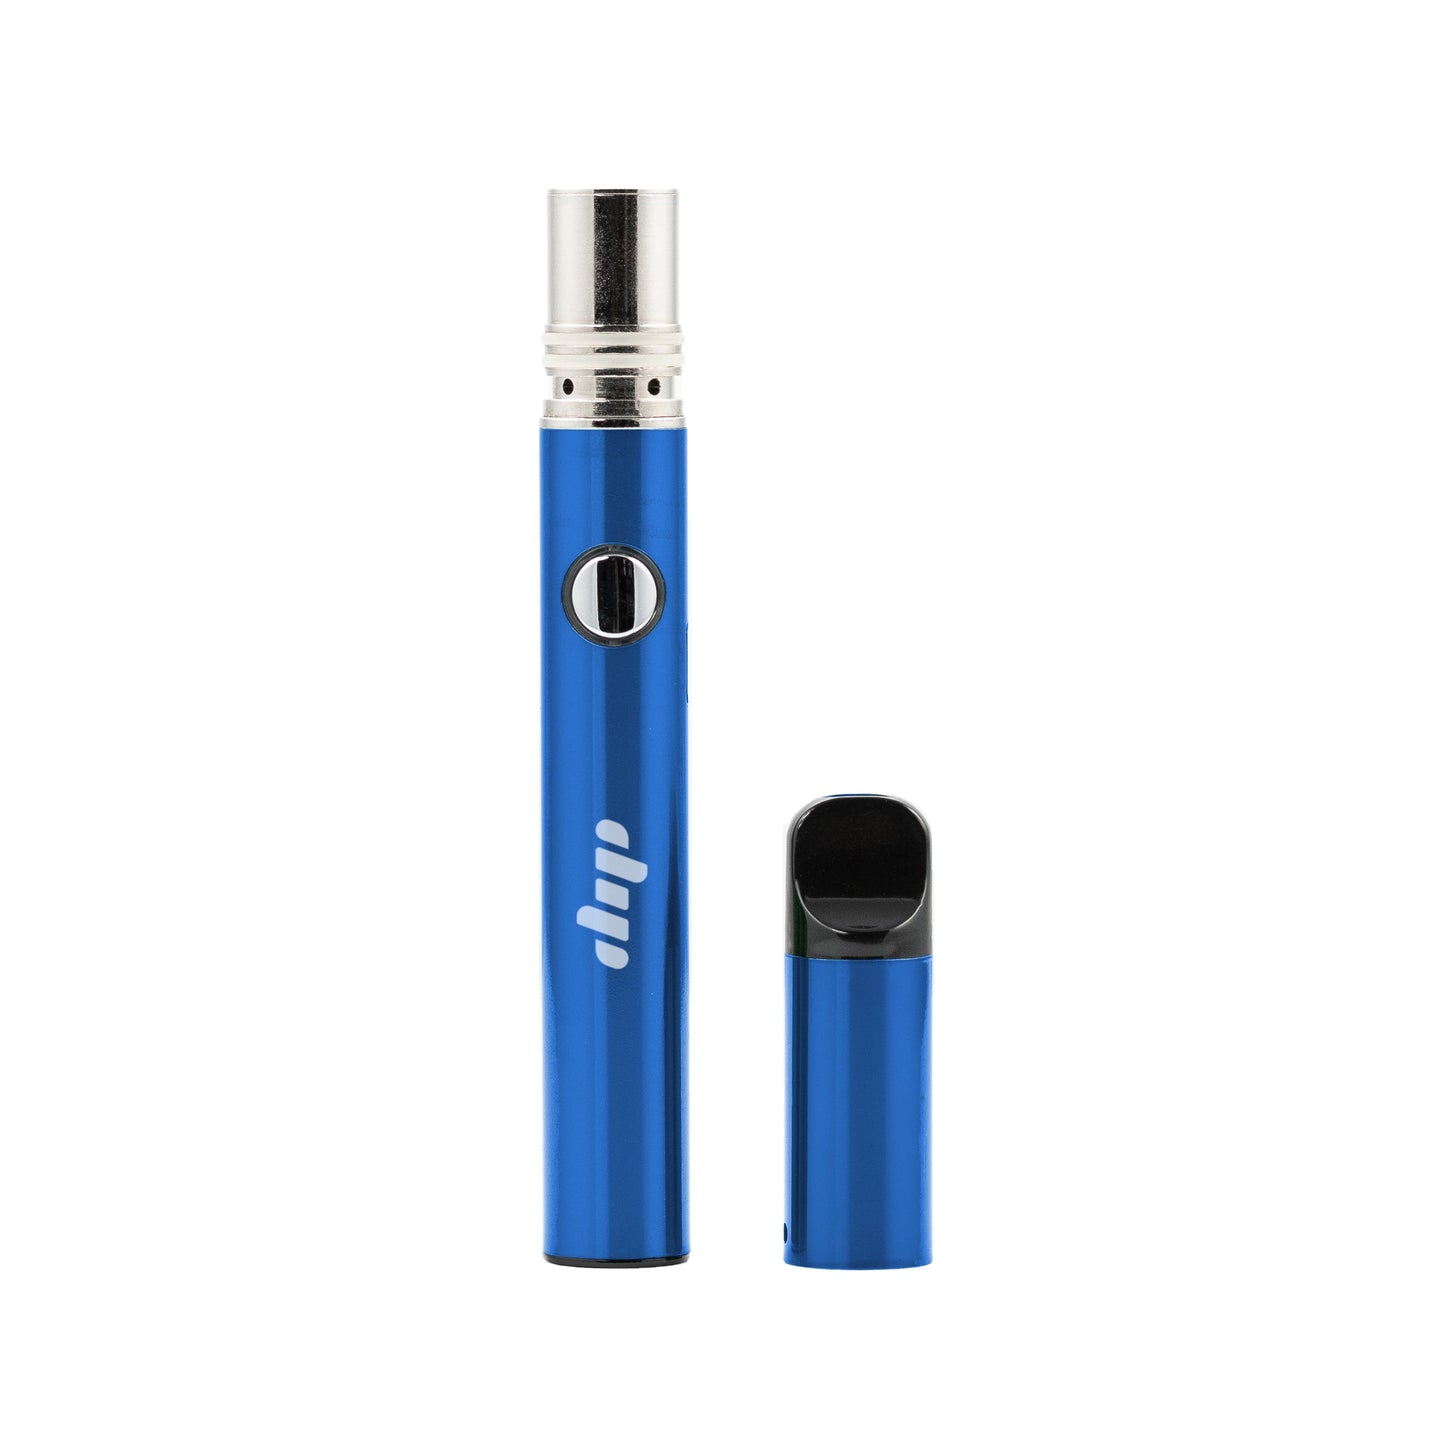 Consume cannabis concentrates sustainably with a refillable Lunar vape pen. 